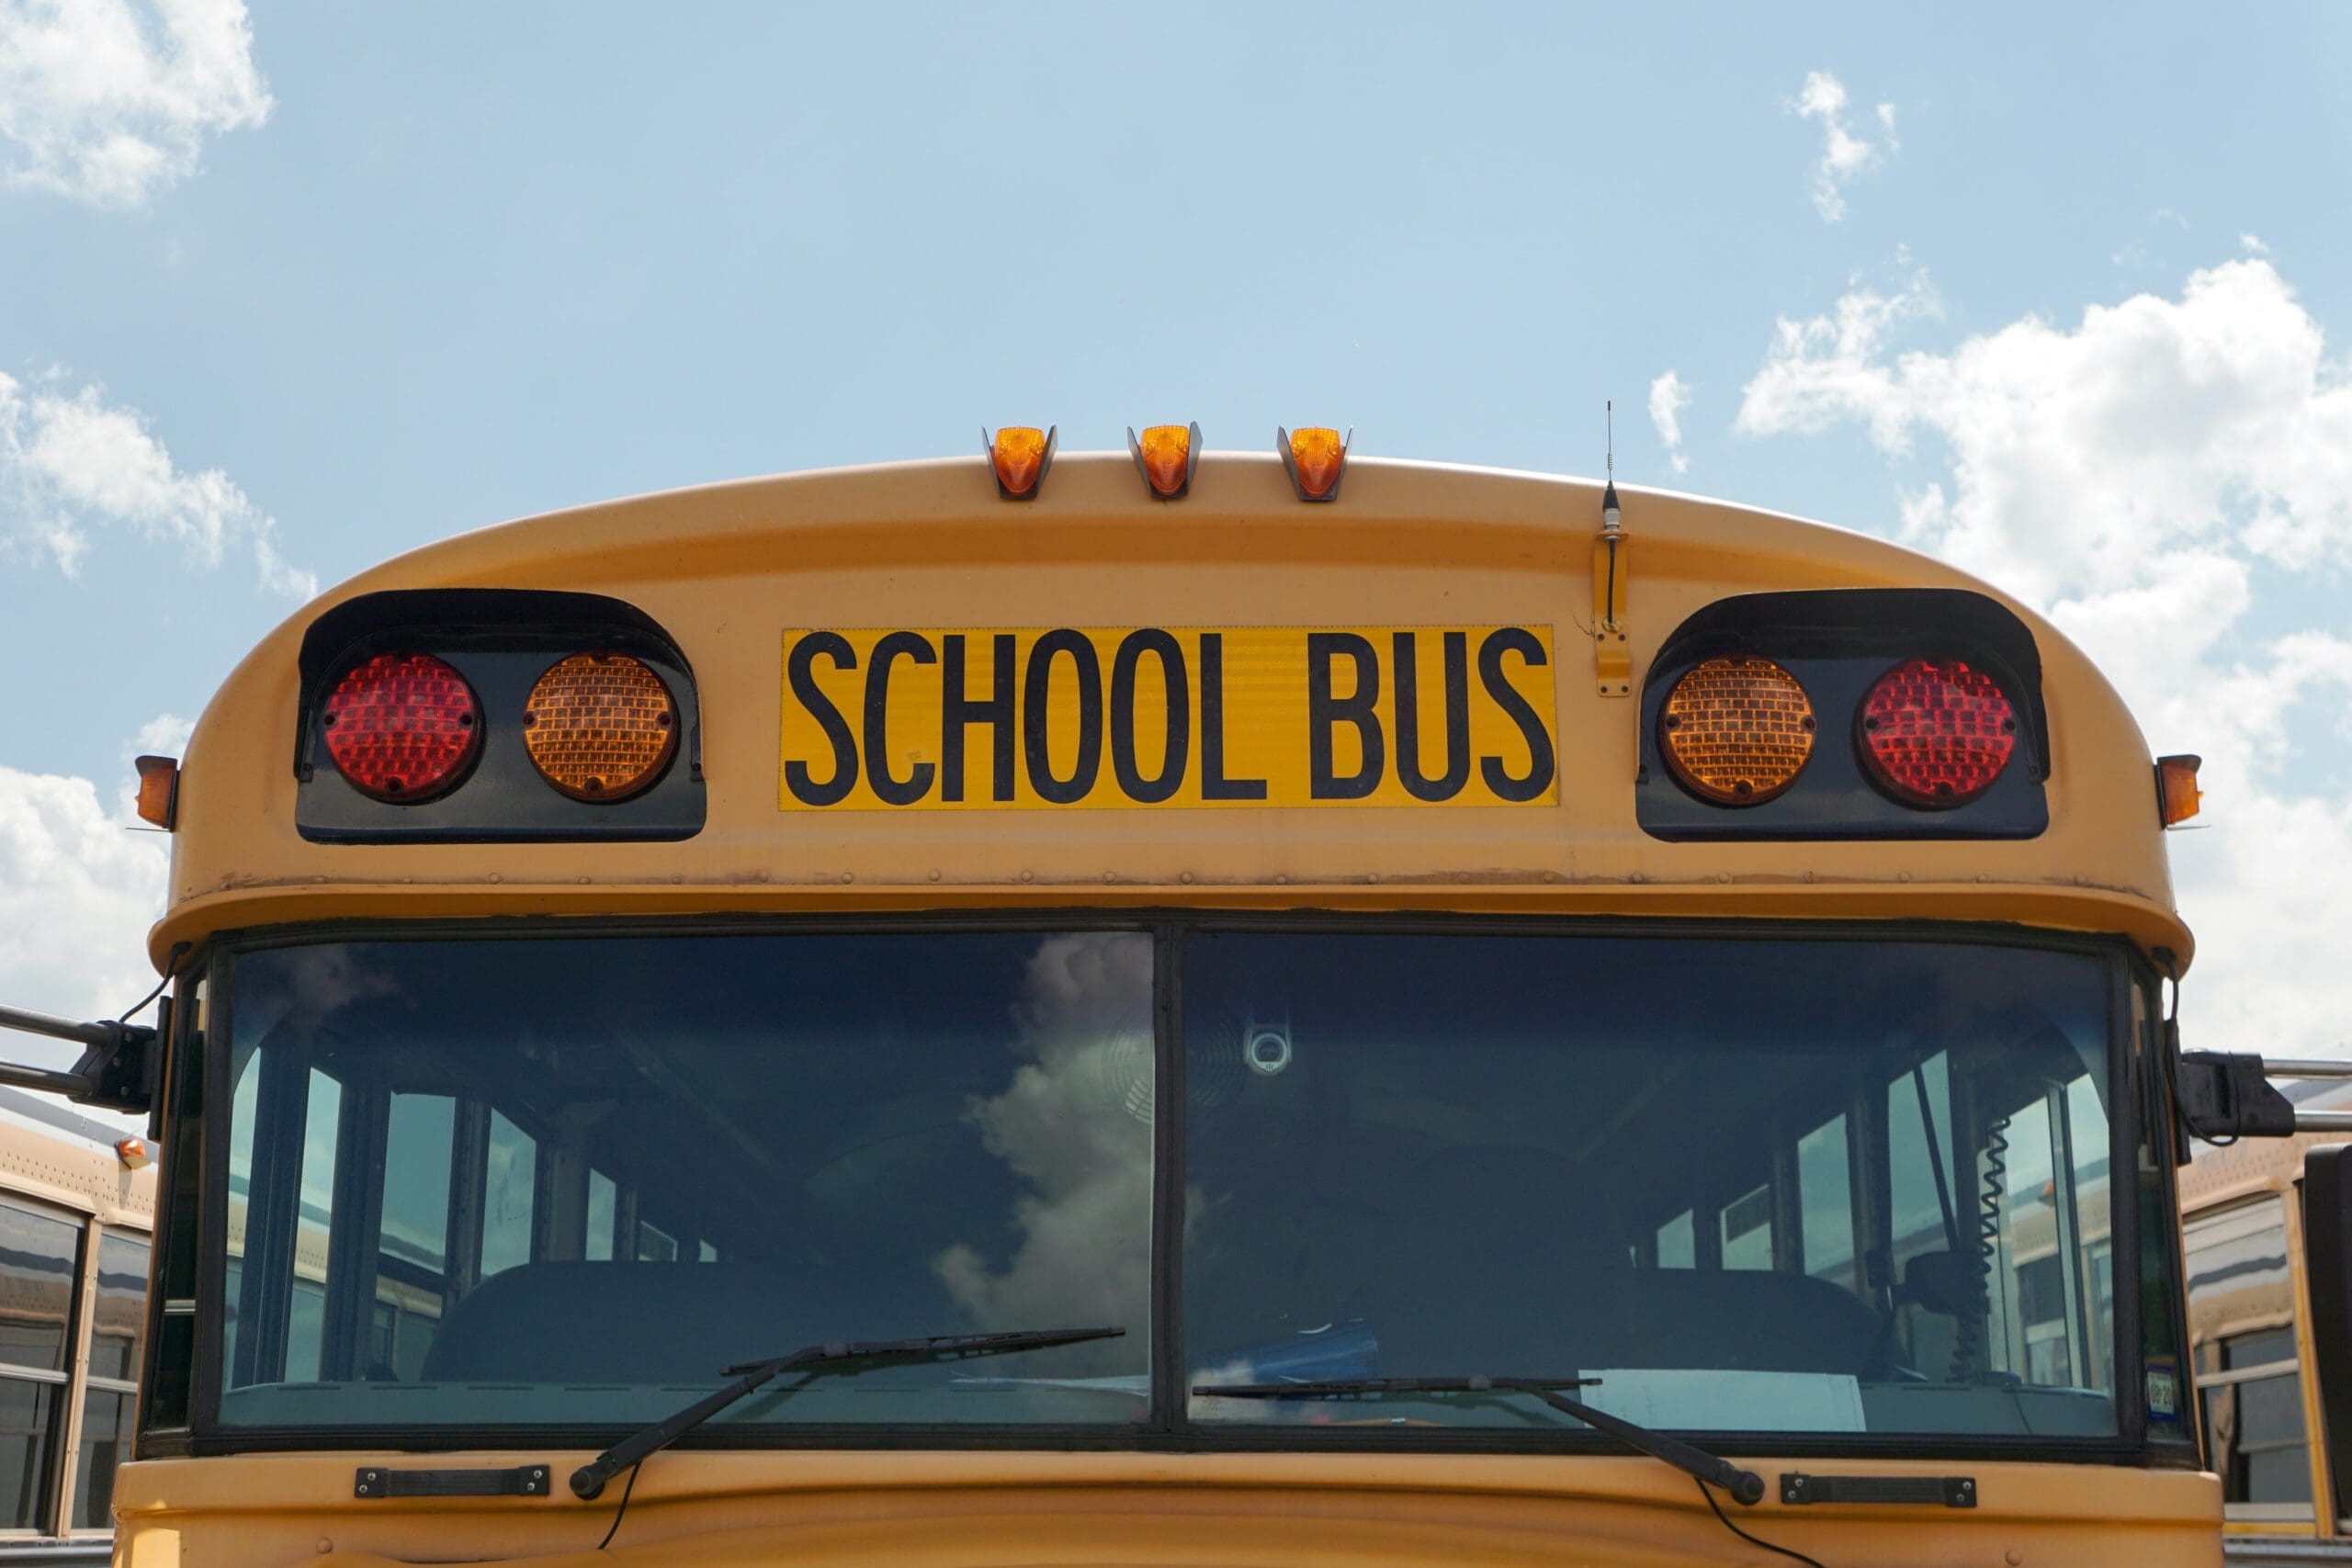 School bus drivers want higher pay, expanded benefits and discipline for unruly behavior on the bus. (Unsplash)